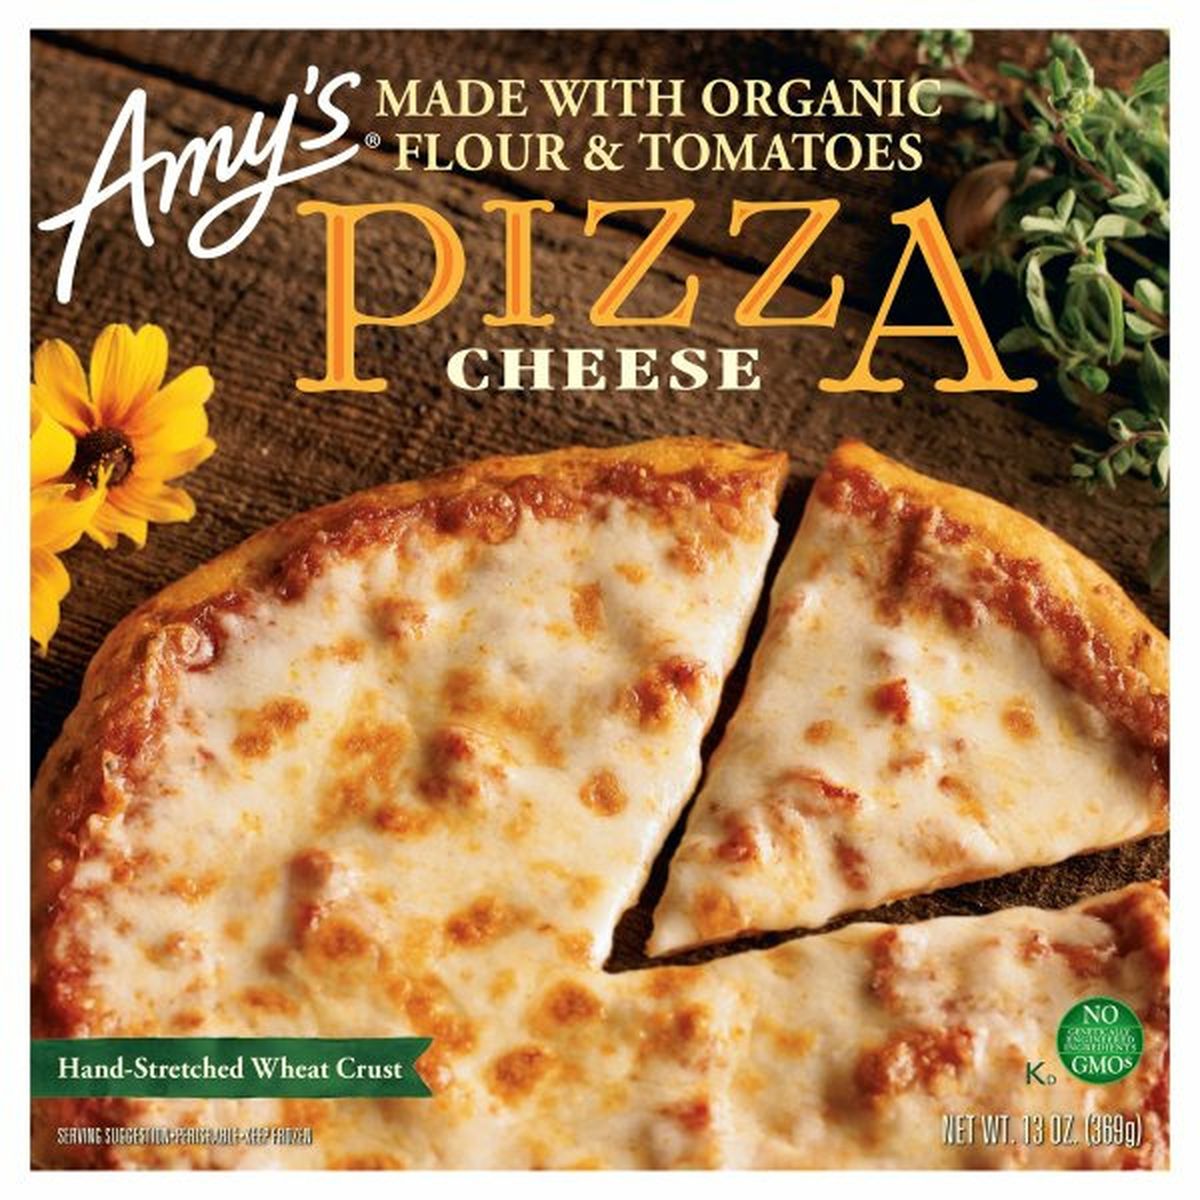 Calories in Amy's Kitchen Pizza, Hand-Stretched Wheat Crust, Cheese